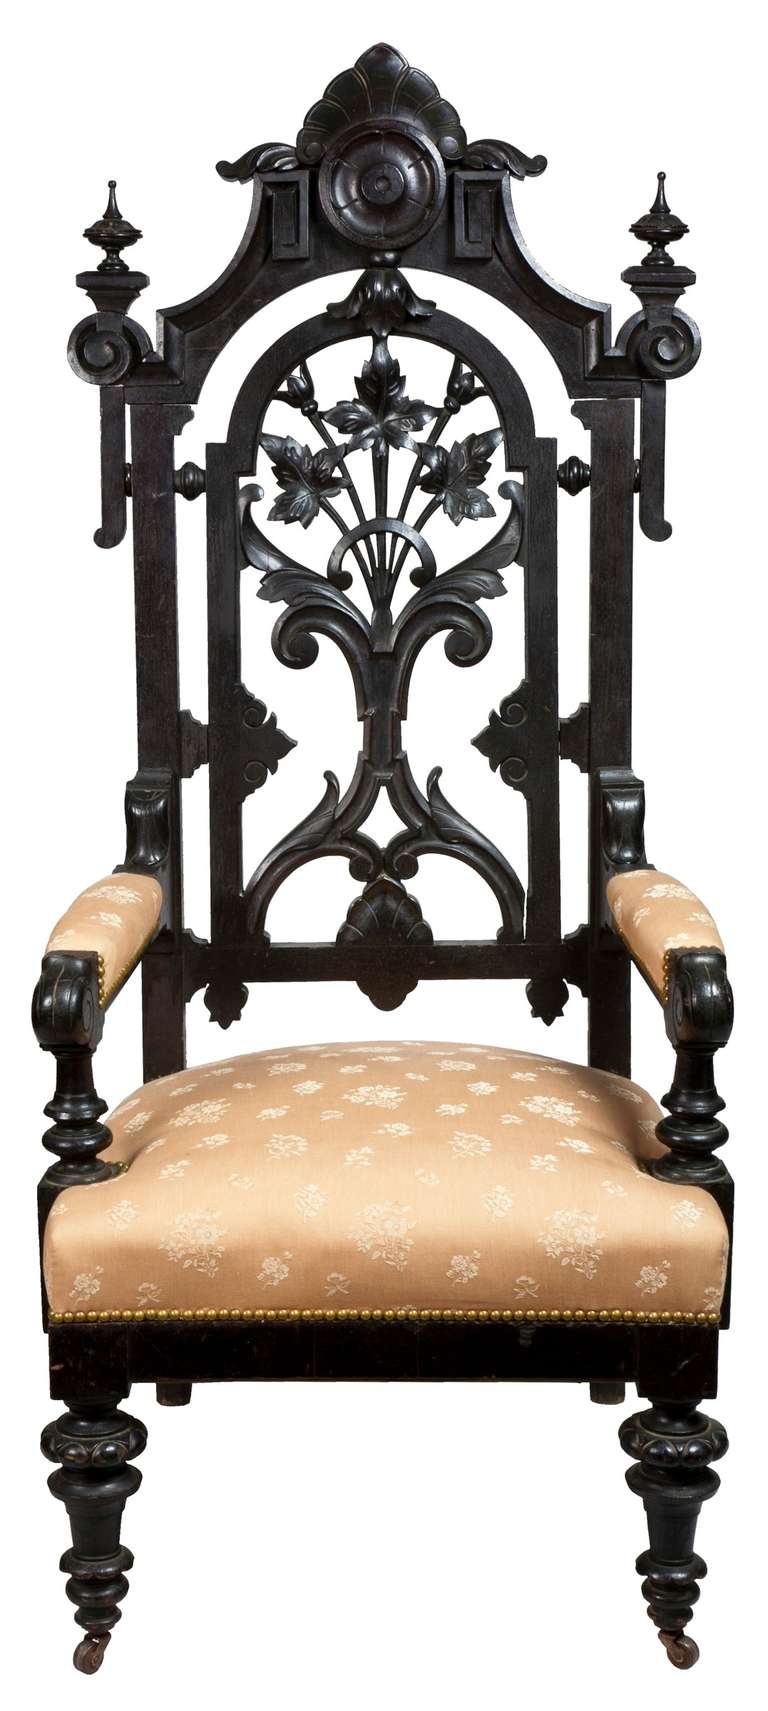 A monumental ebonized Renaissance Revival Baltimore armchair, circa 1860. This masterful armchair is a tour de force of carved and turned elements, the back of this chair is reminiscent of the later Art Nouveau style during this century. The finials